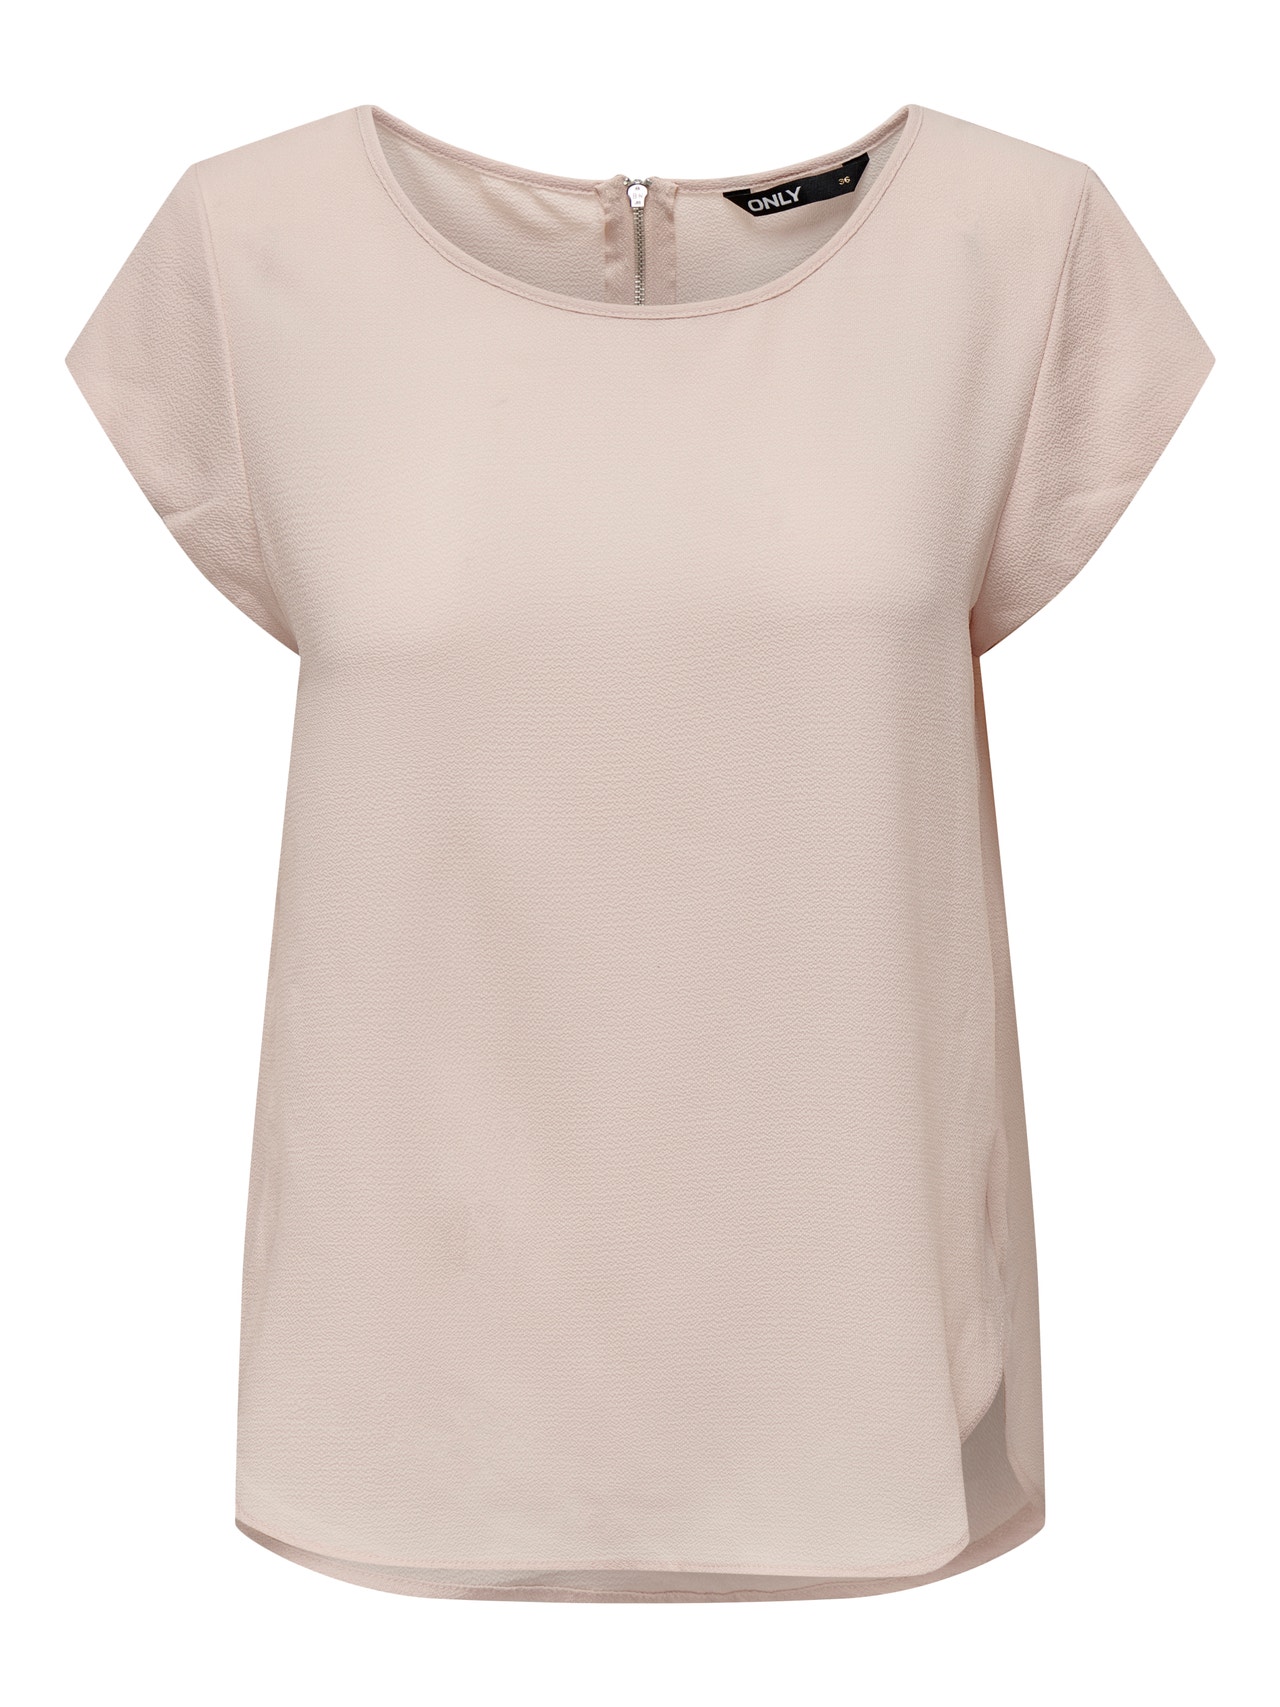 ONLY Loose Short Sleeved Top -Peach Whip - 15142784